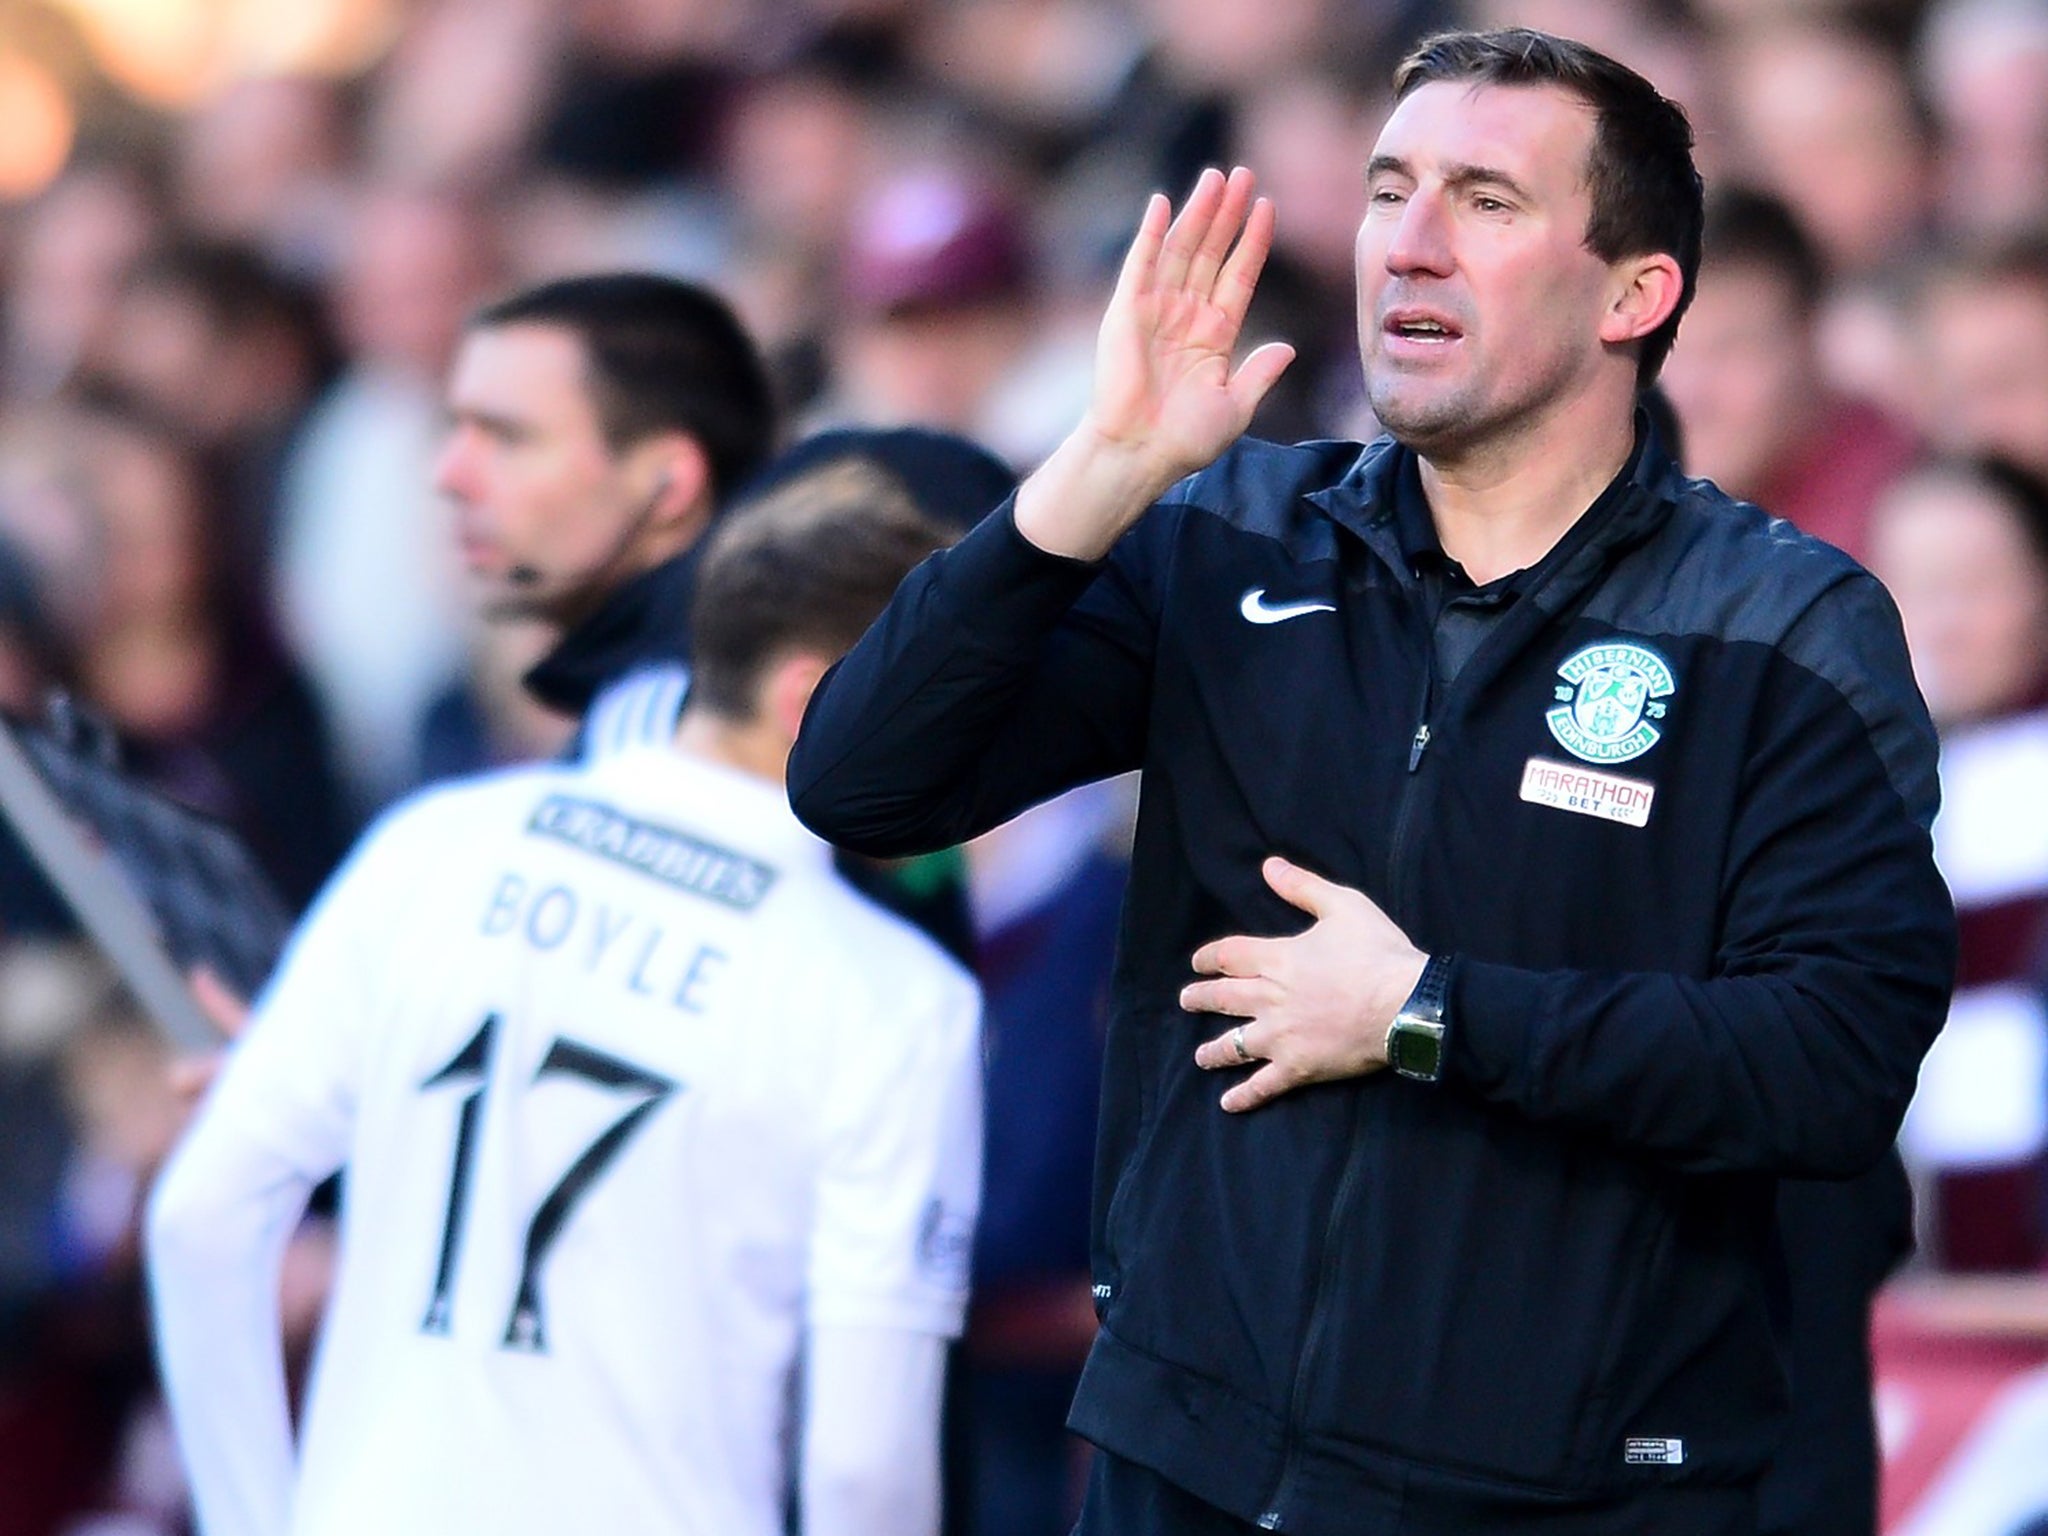 Alan Stubbs took over in June following relegation, with a first-team squad of just 11 players